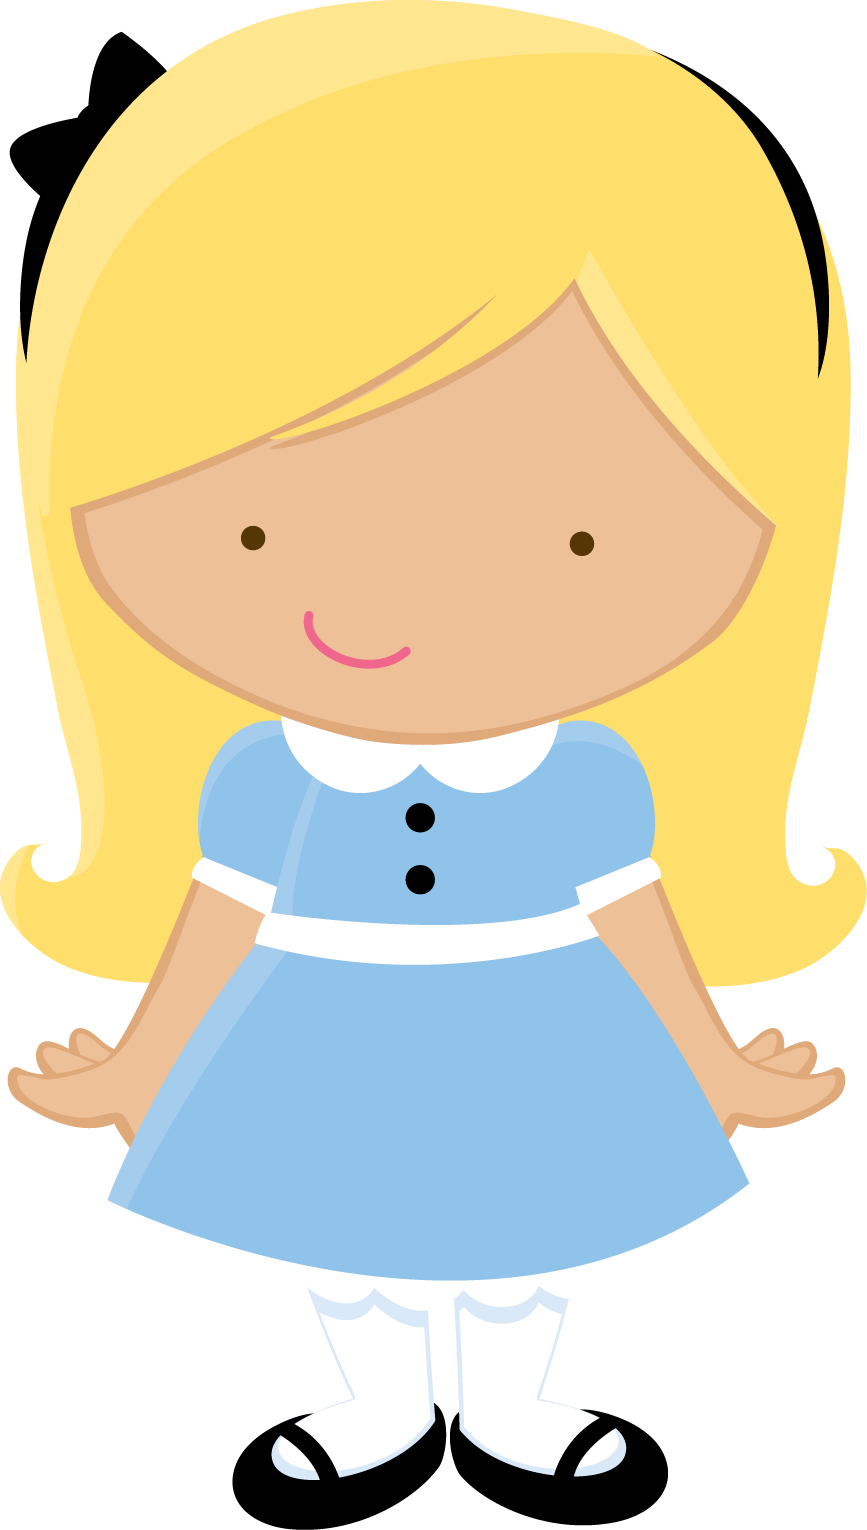 ZWD_Teapot - ZWD_Alice.png - 